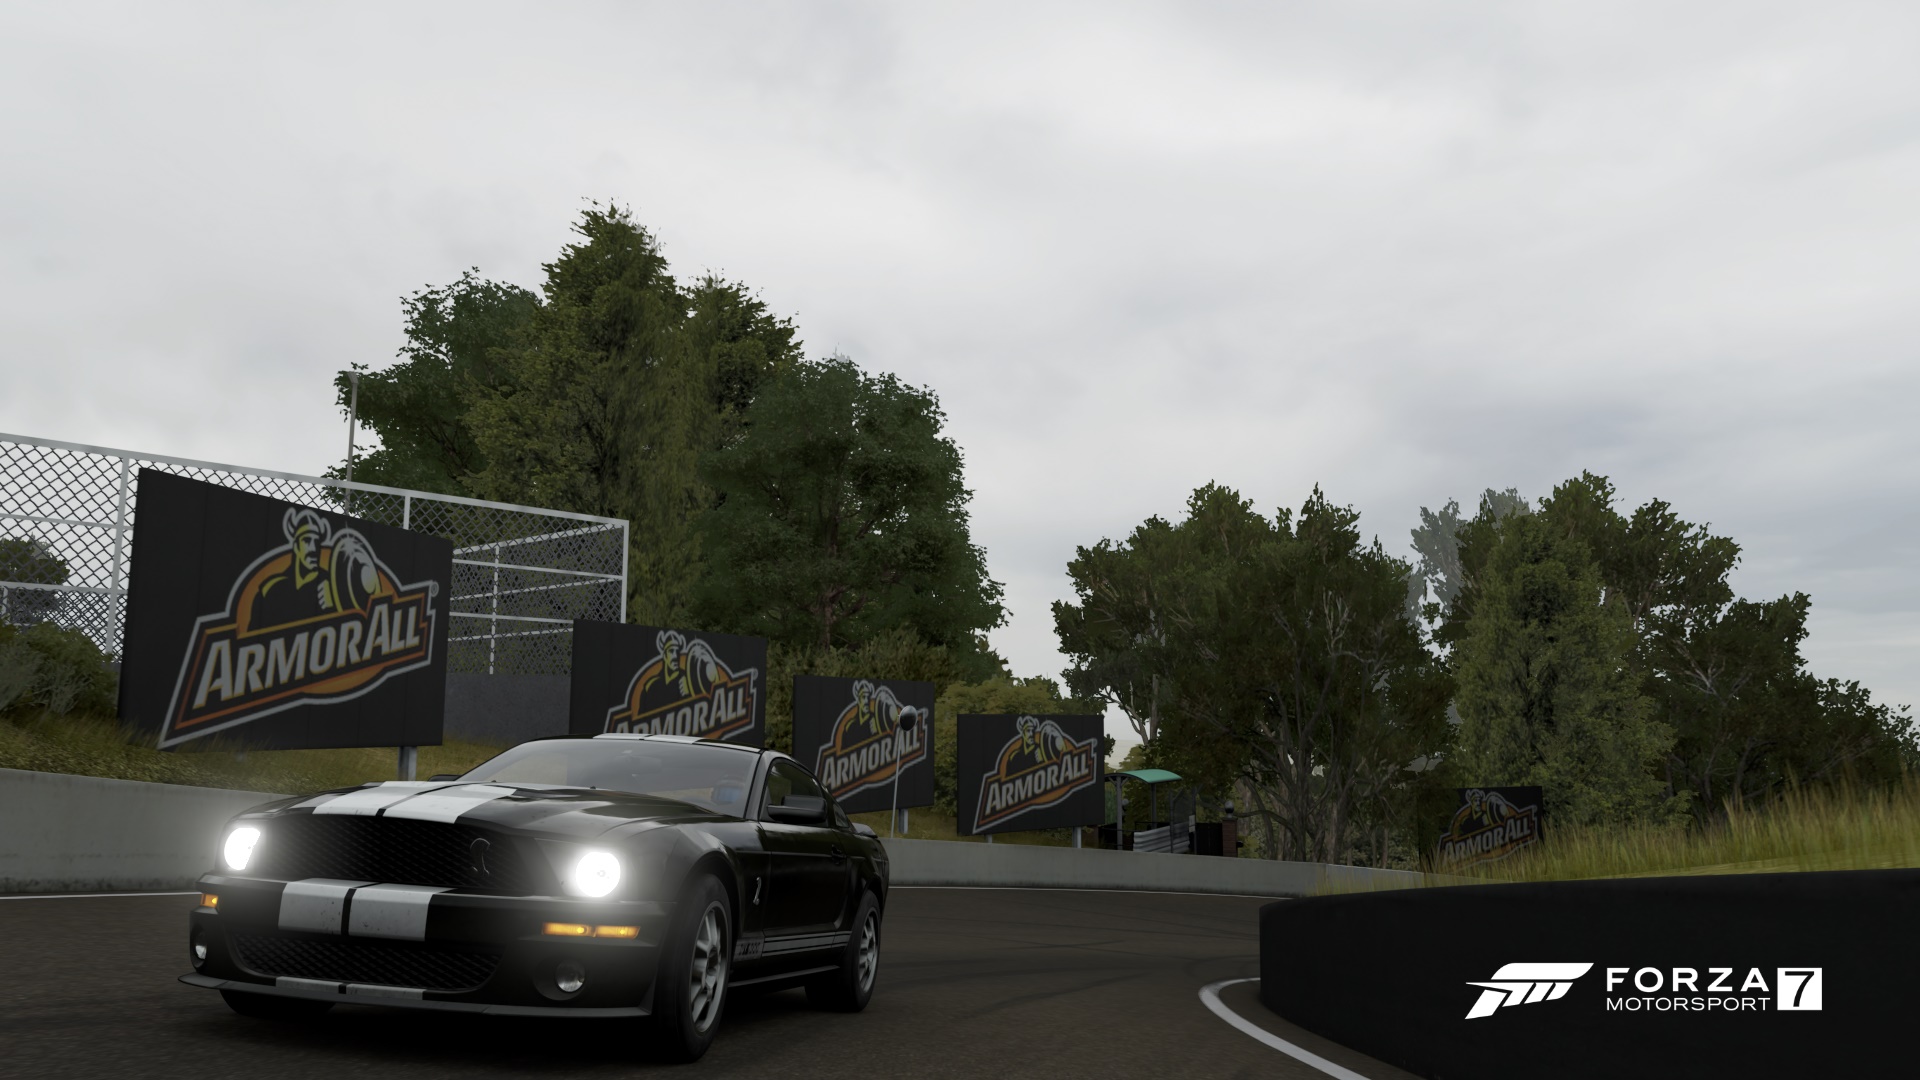 General 1920x1080 Ford Mustang Shelby Forza Motorsport 7 video games Ford Shelby race tracks asphalt black cars vehicle racing Turn 10 Studios car Ford Mustang S-197 II Ford Mustang